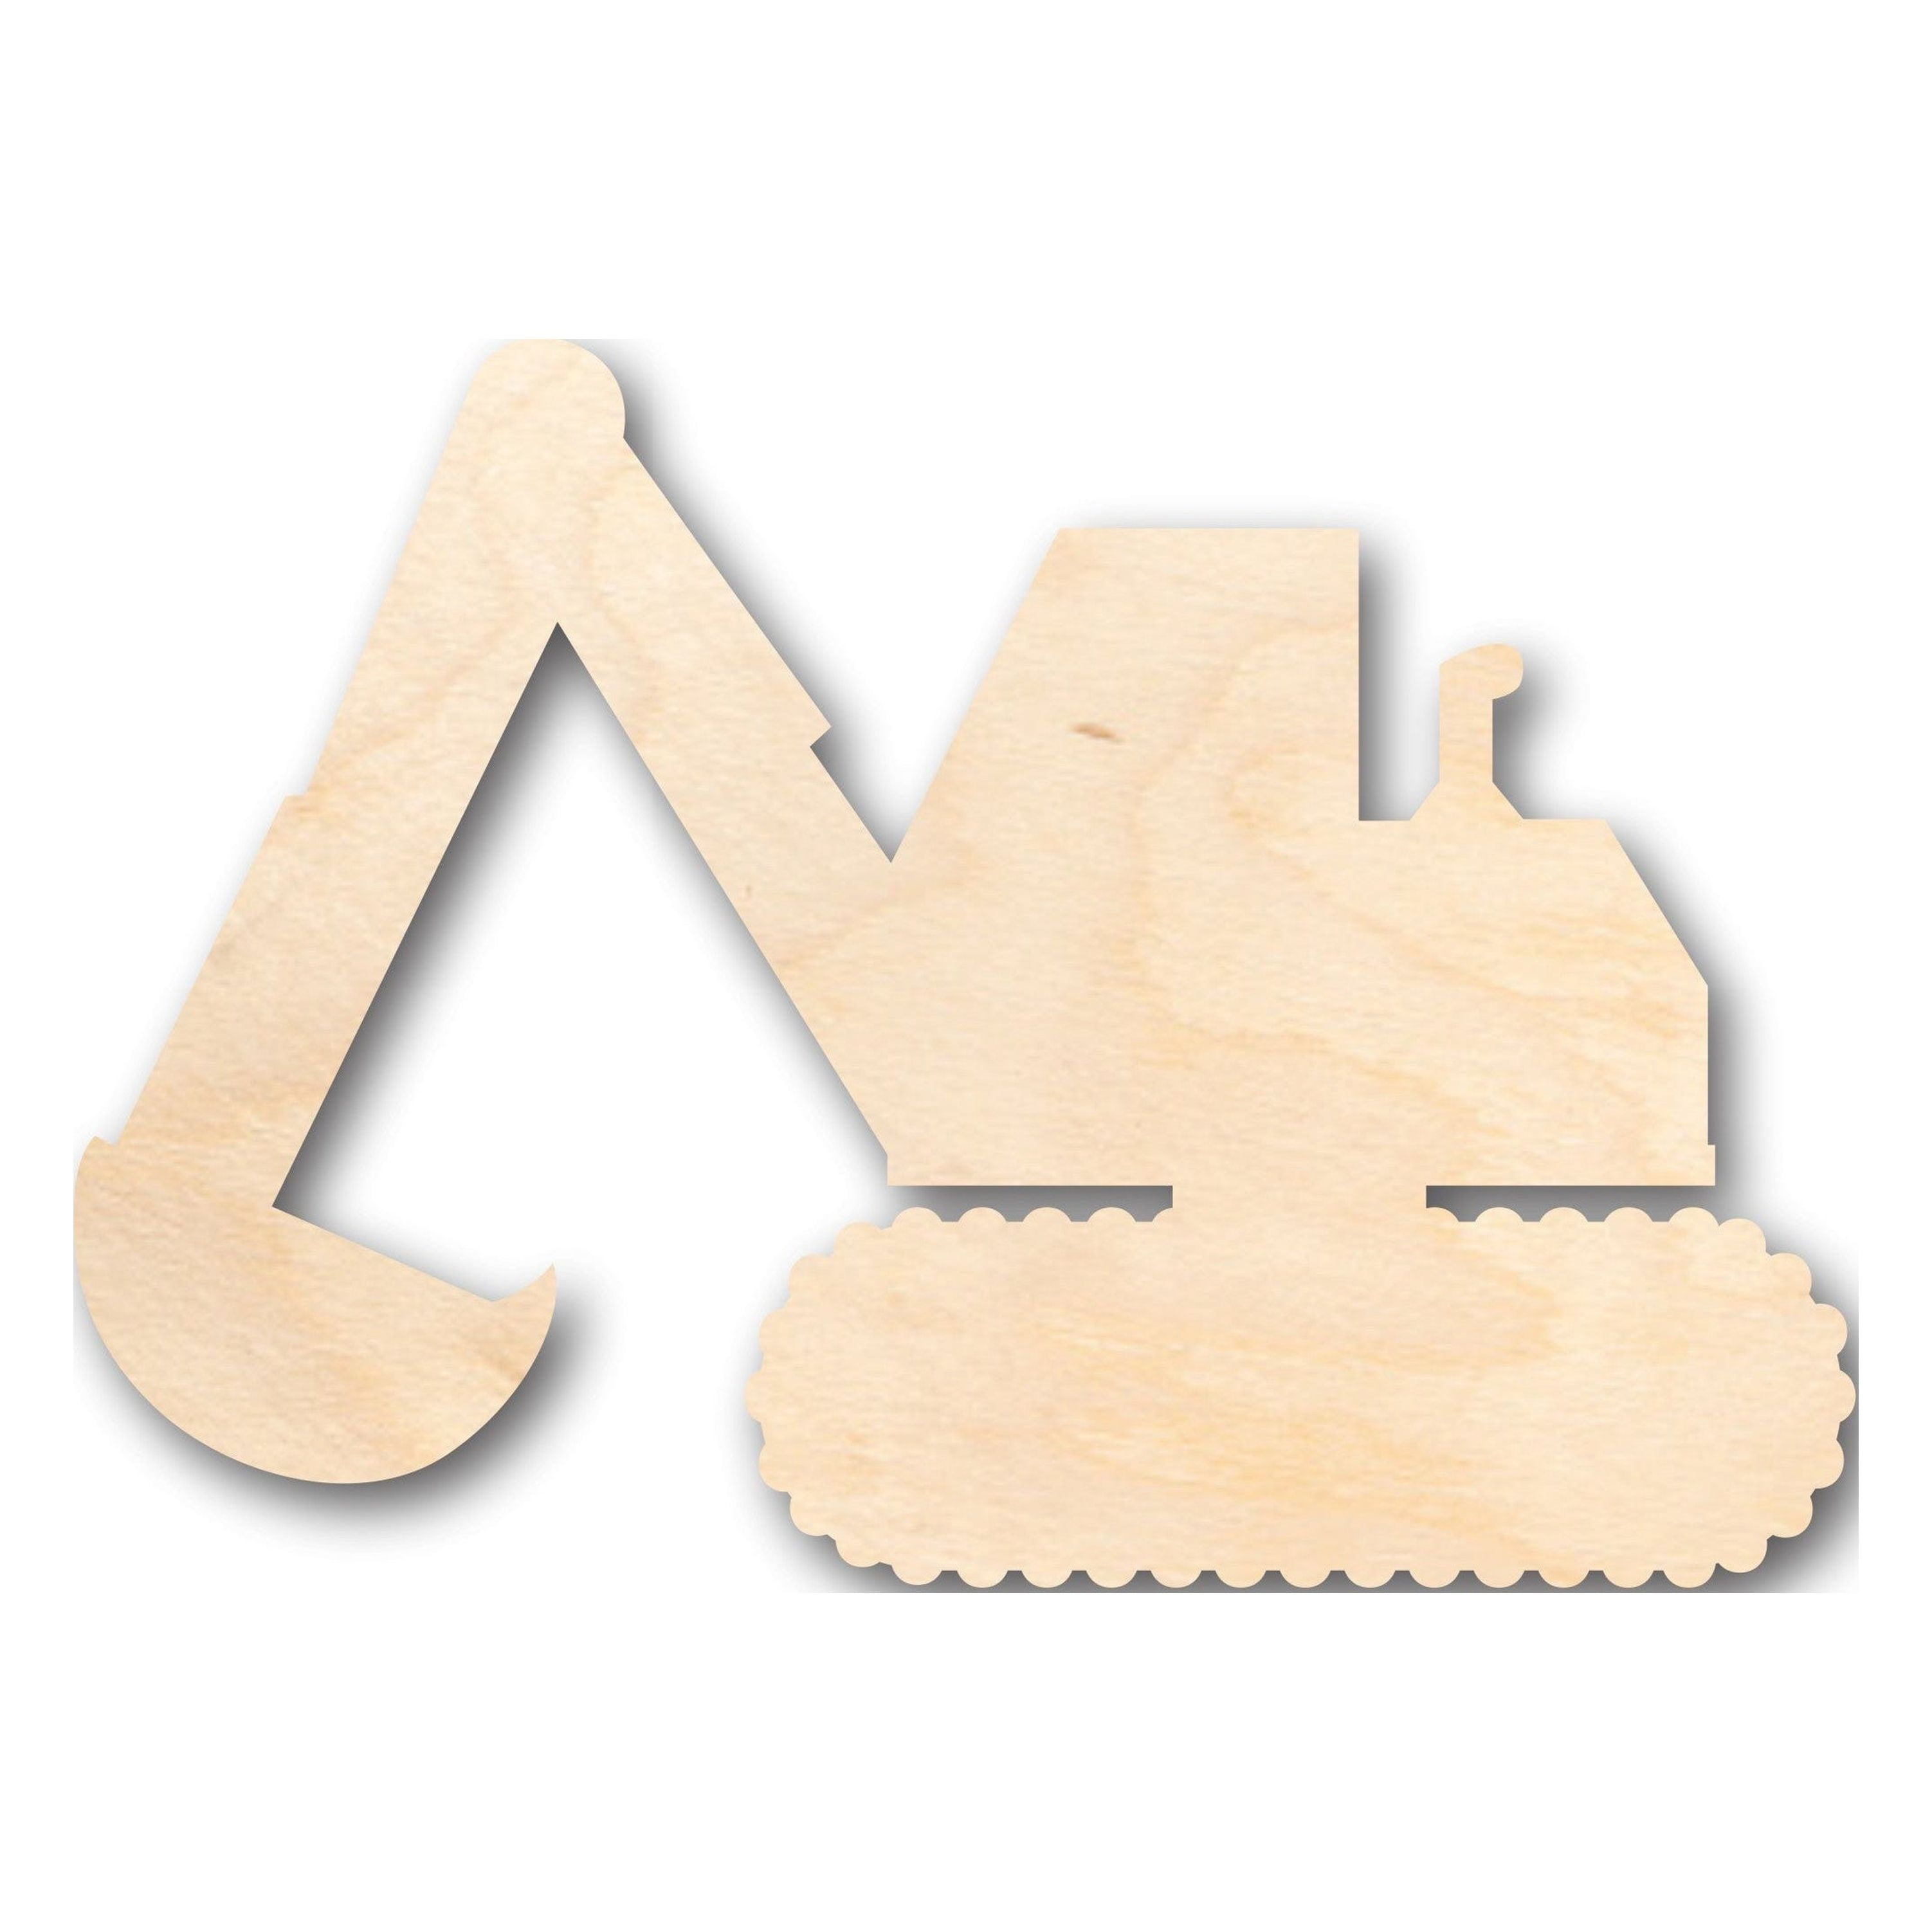 Balsa Wood 1/8 X 3 X 36in (10) - Quantity is Listed in Parenthesis in Title